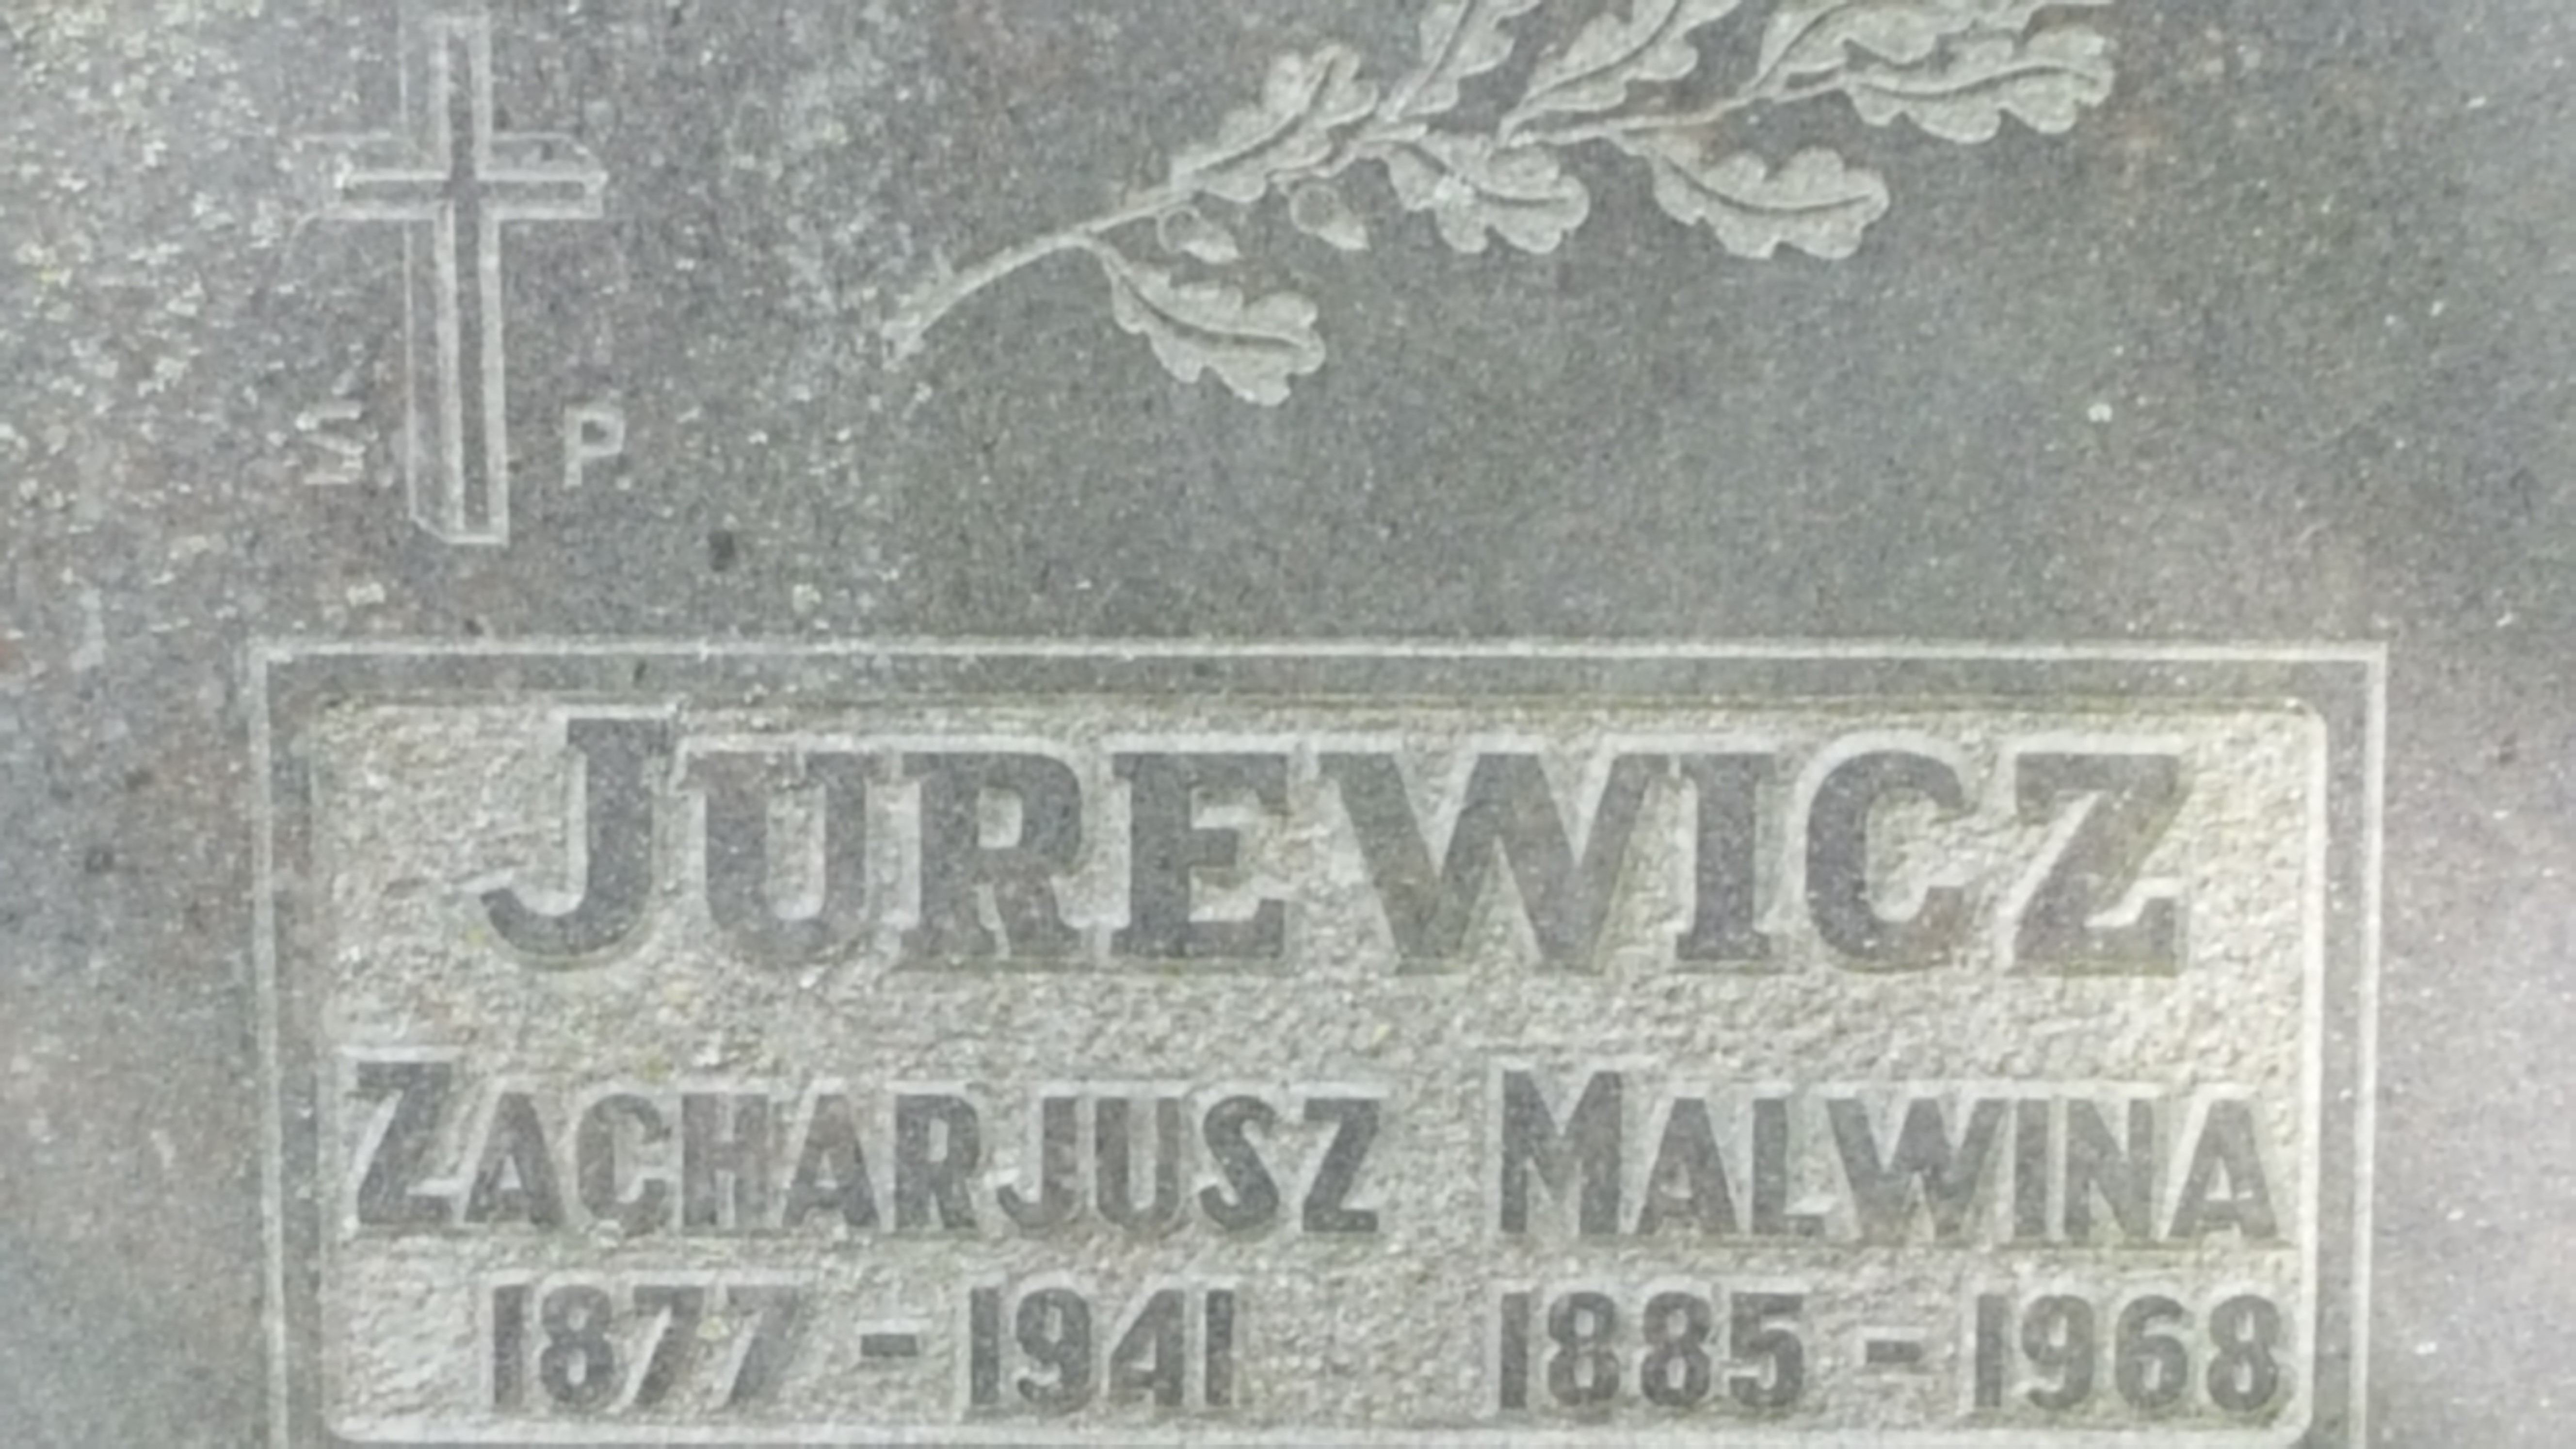 Inscription from the tombstone of Malvina and Zacharjusz Jurewicz, St Michael's cemetery in Riga, as of 2021.